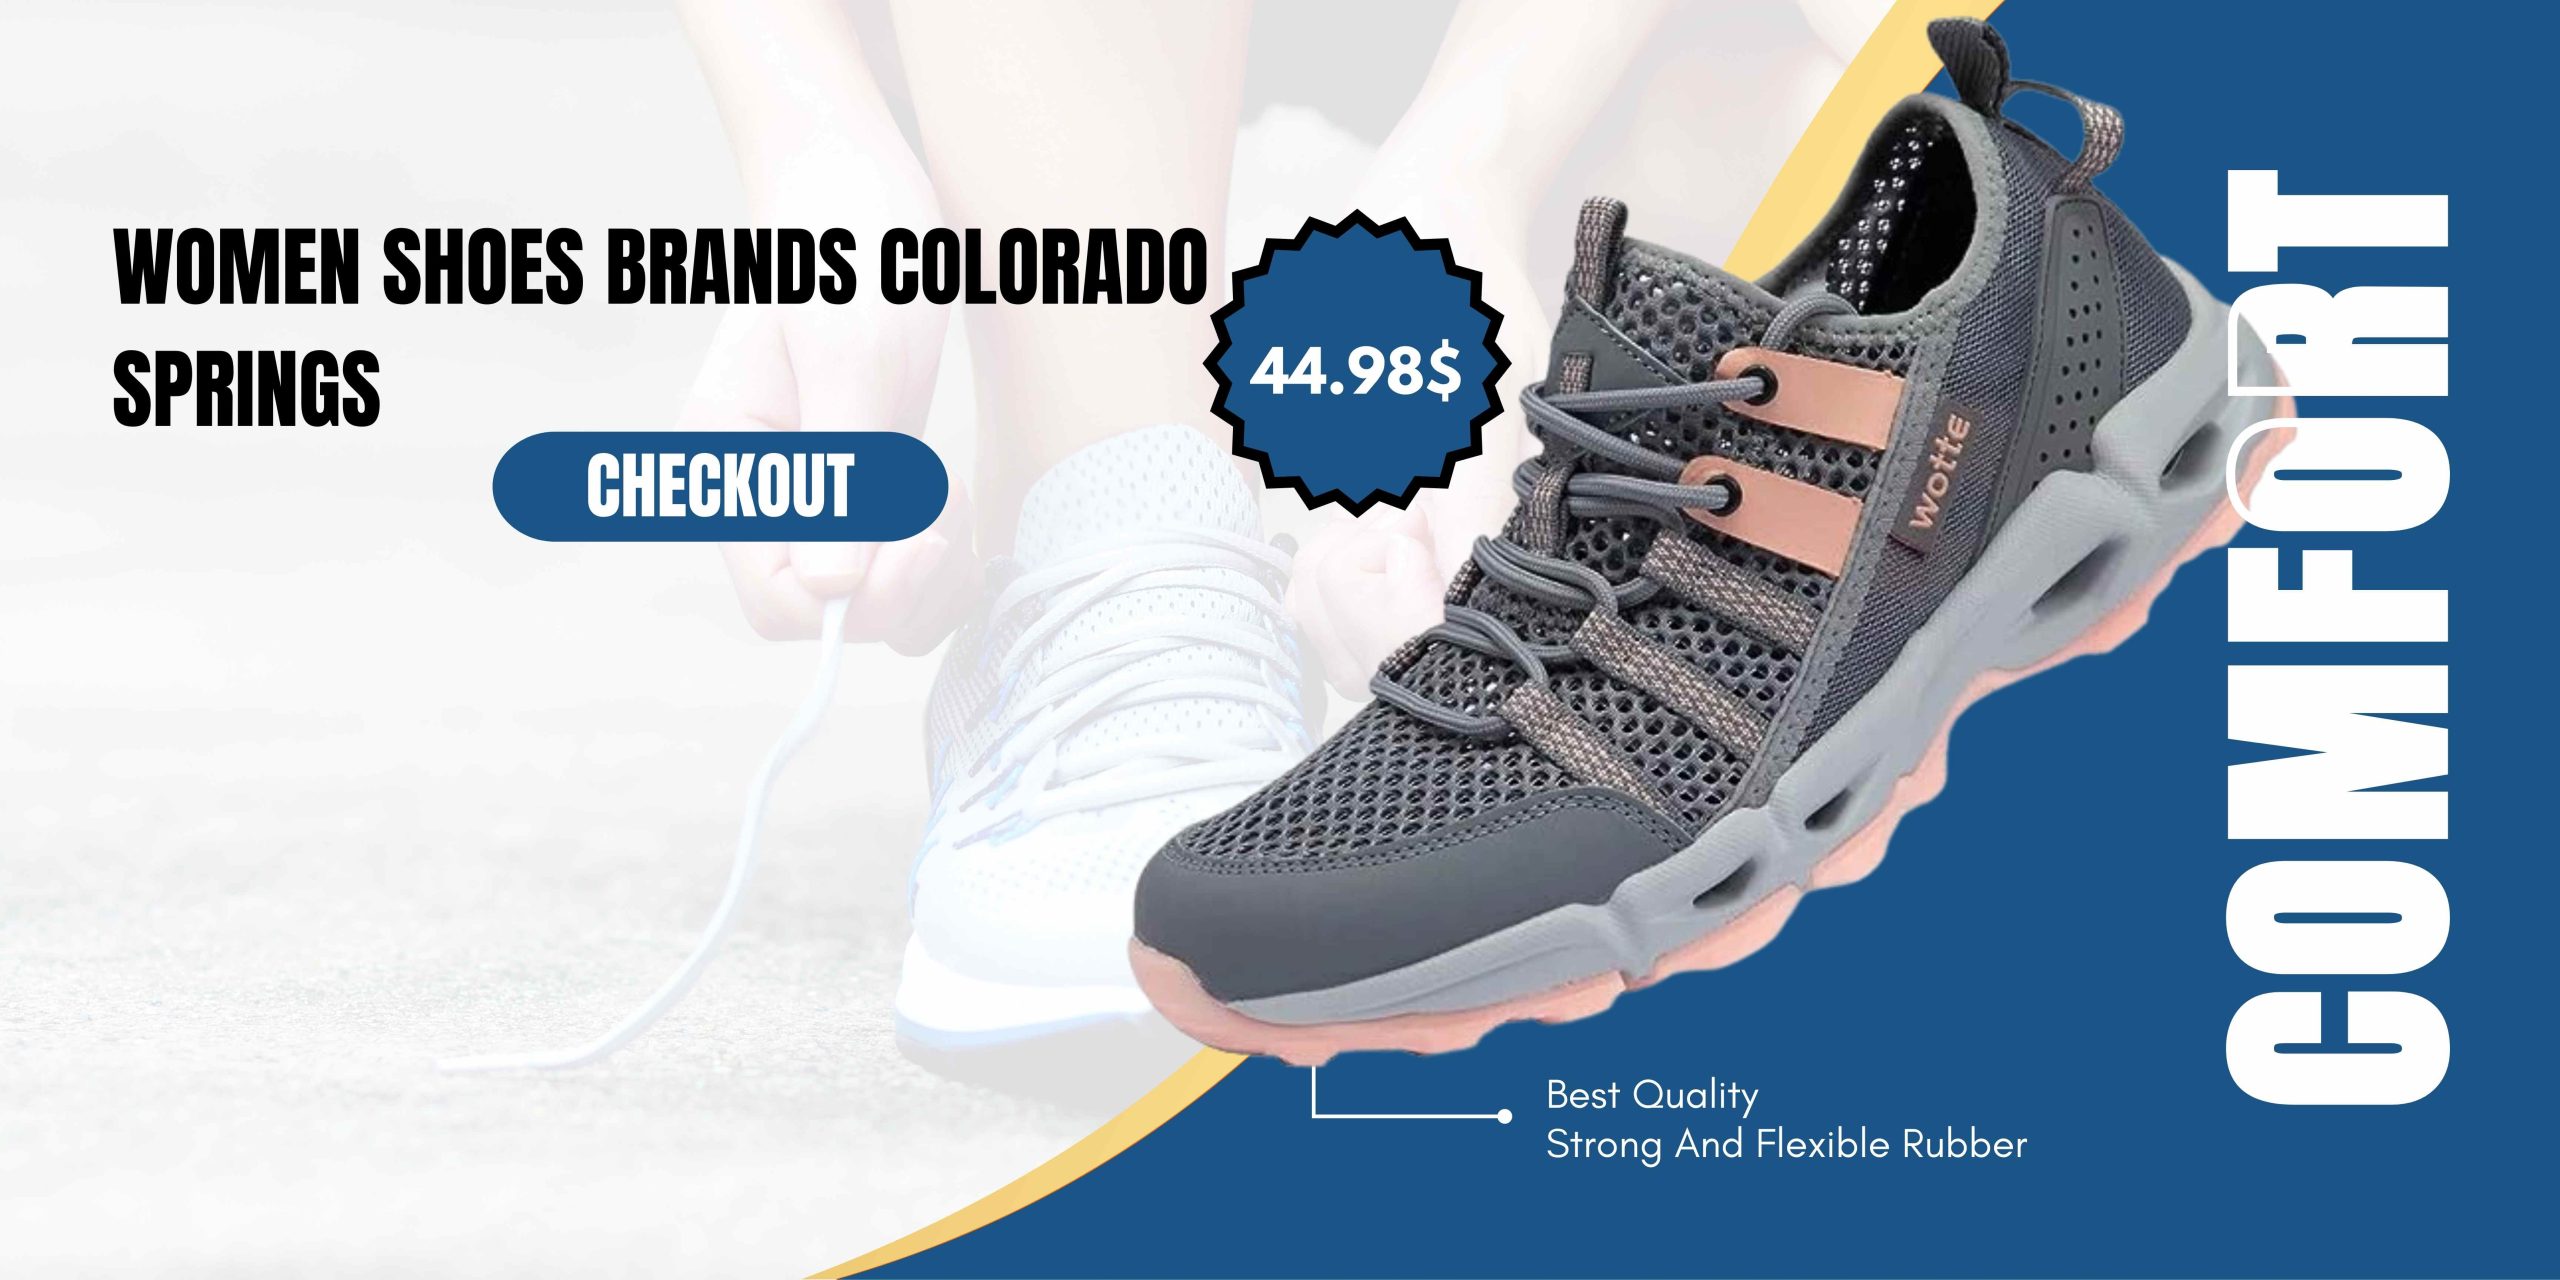 Women Shoes Brands Colorado Springs: Find the Perfect Pair for Your Style!